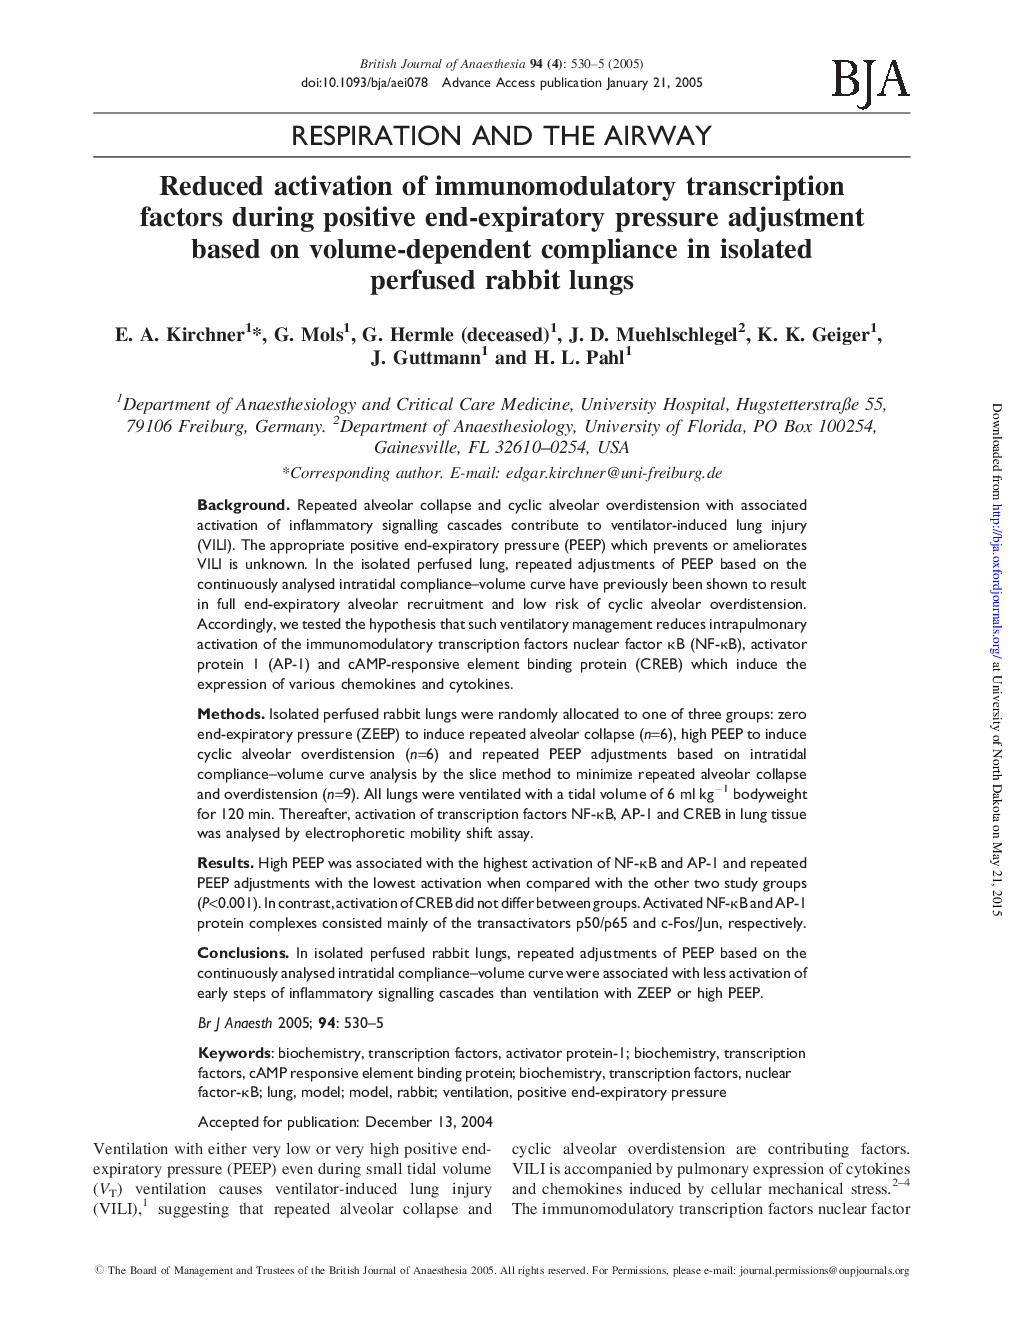 Reduced activation of immunomodulatory transcription factors during positive end-expiratory pressure adjustment based on volume-dependent compliance in isolated perfused rabbit lungs